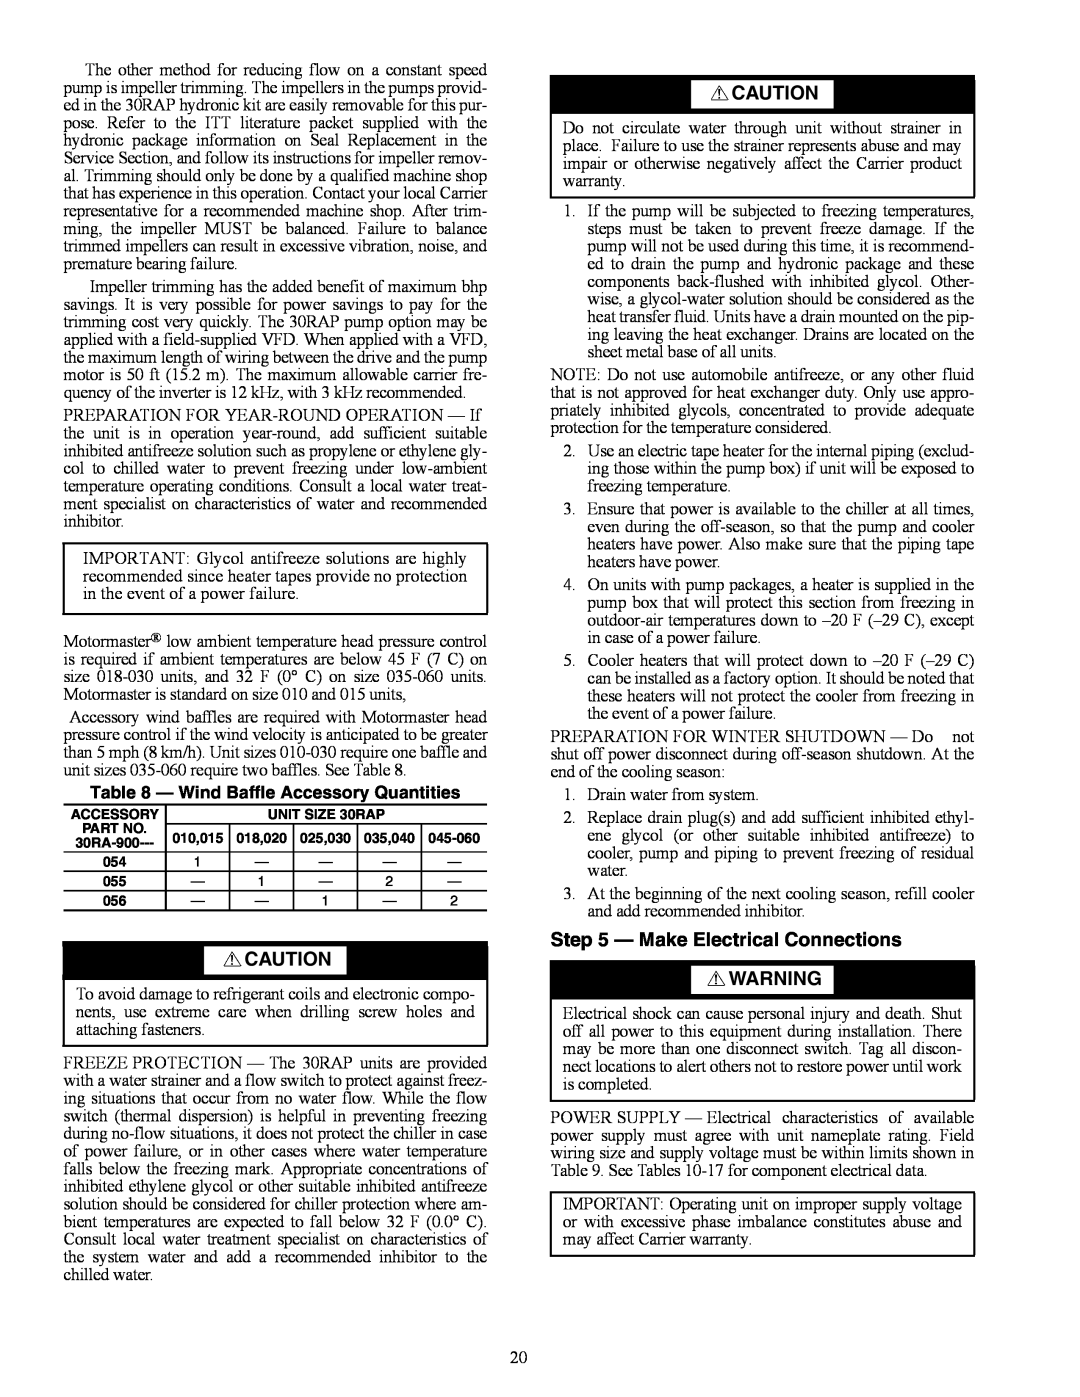 Carrier 30RAP010-060 installation instructions Make Electrical Connections, Wind Baffle Accessory Quantities 